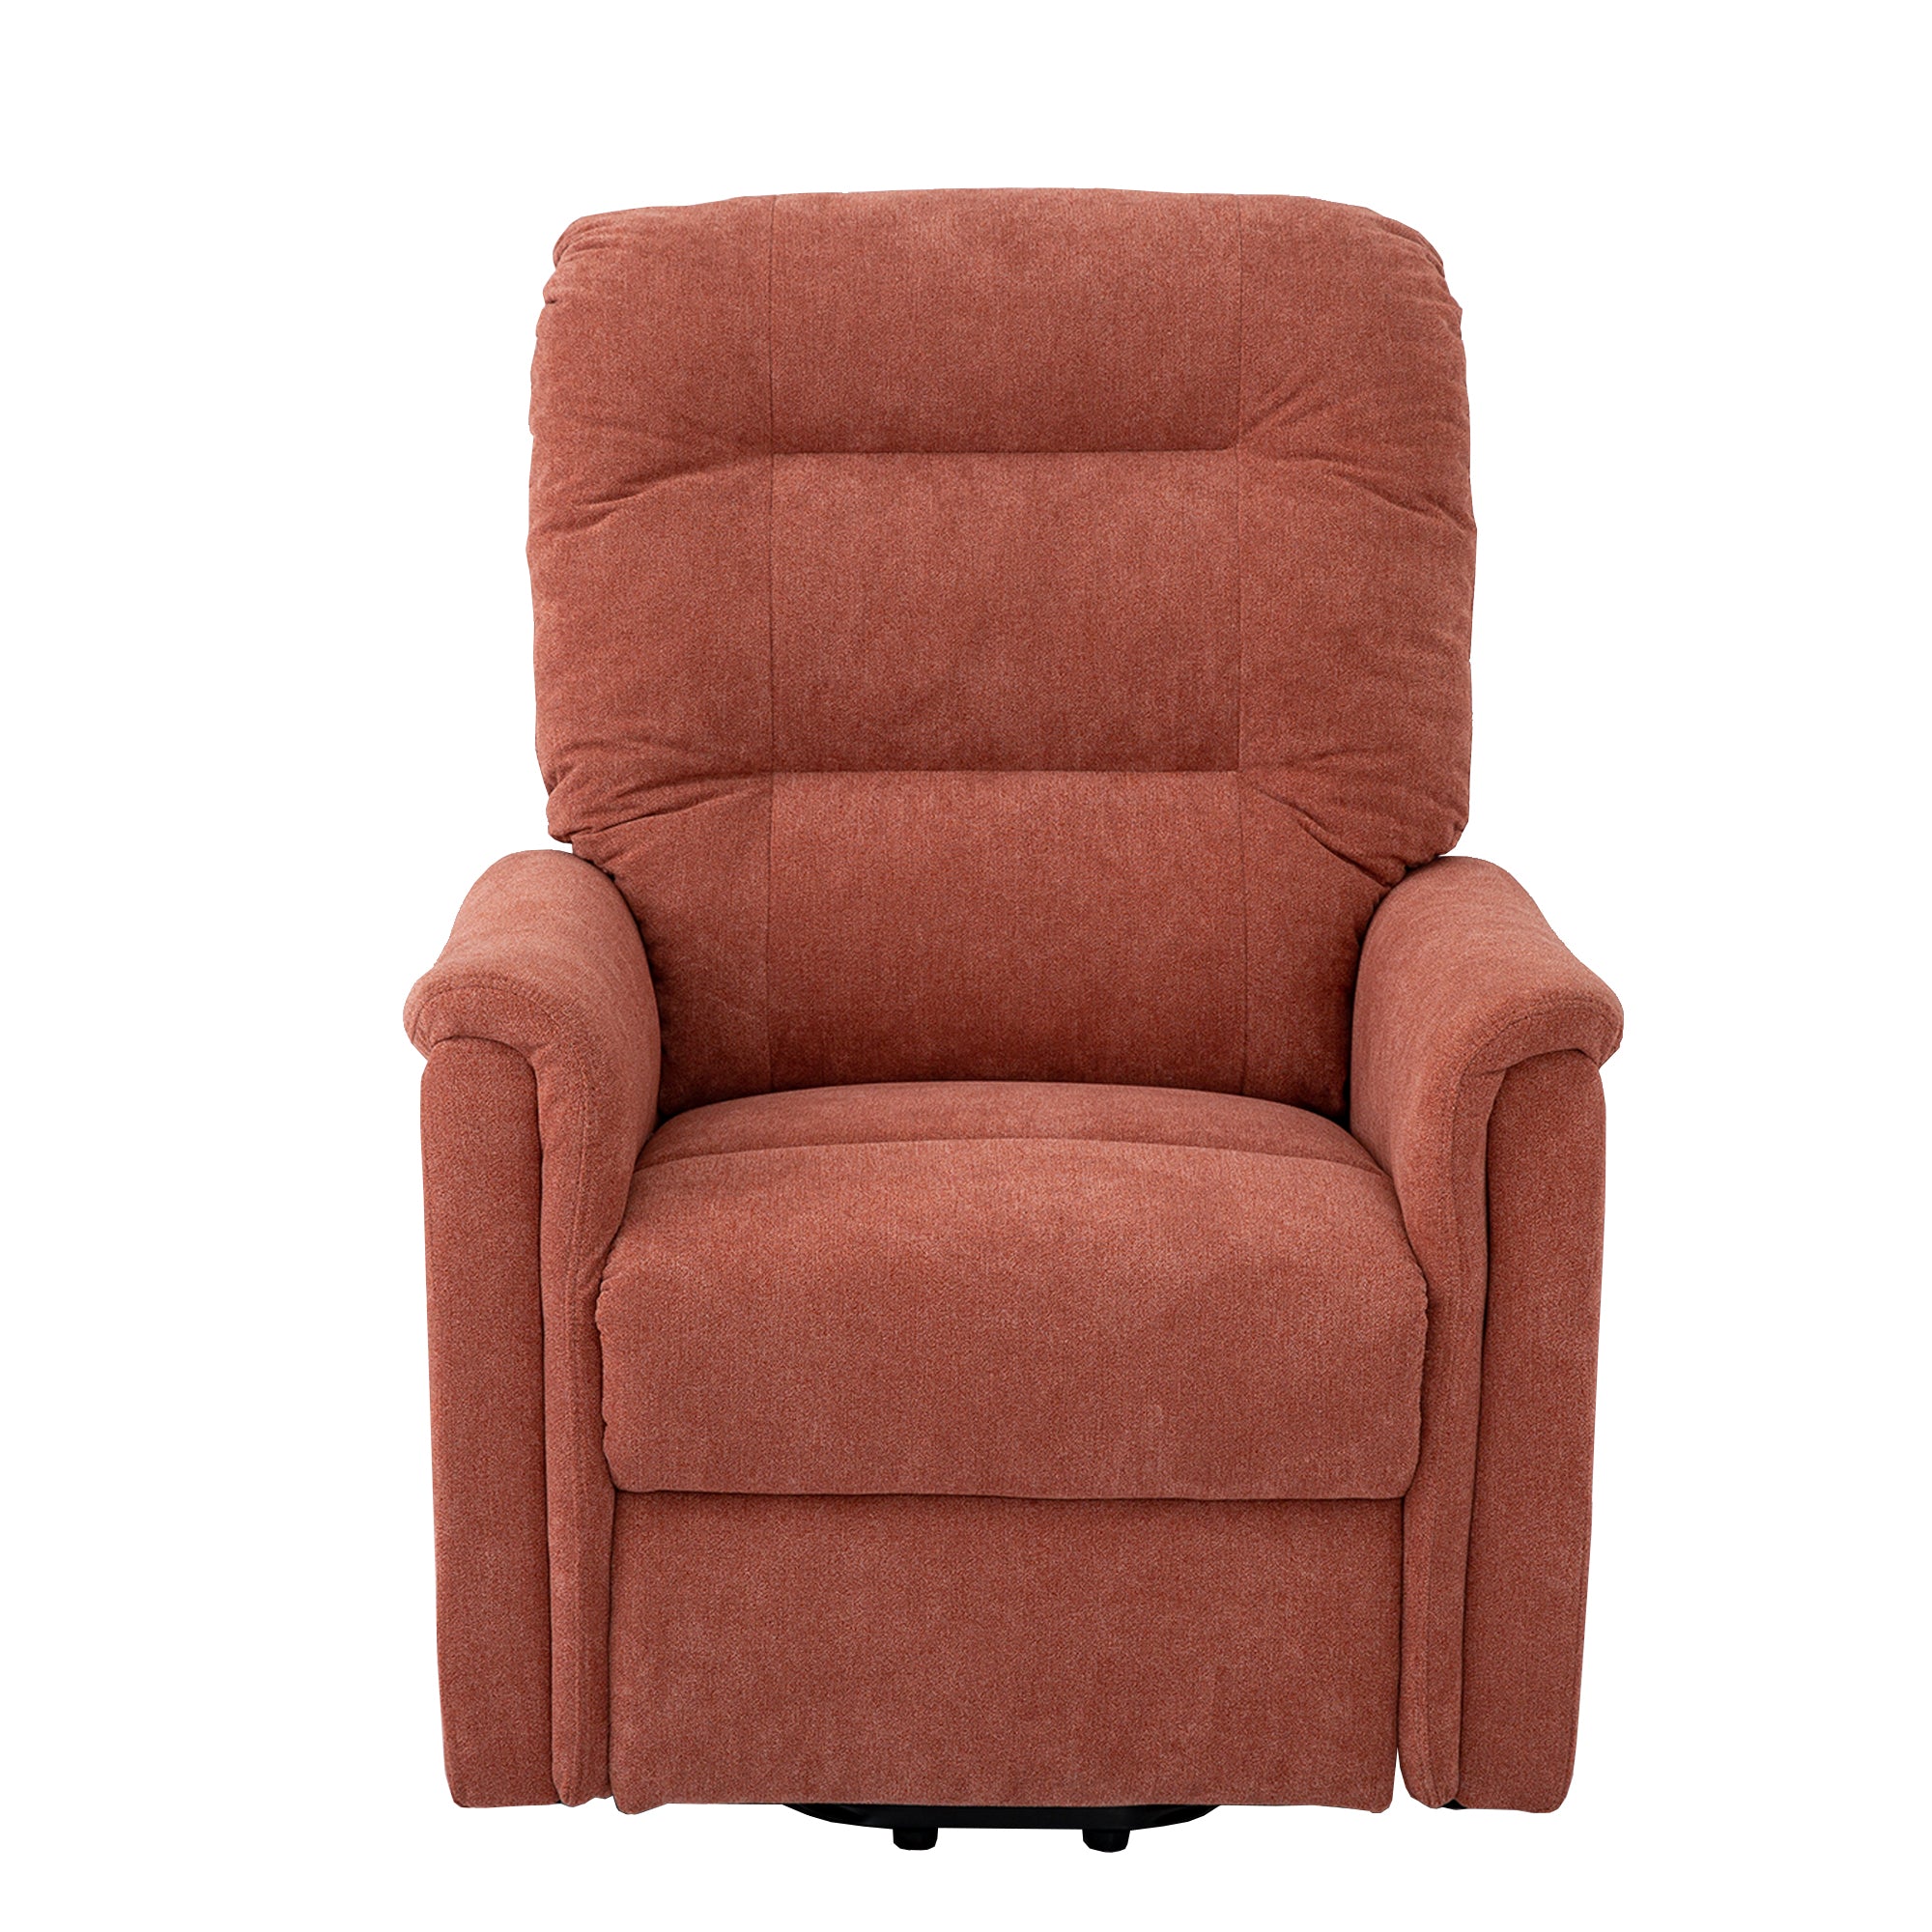 Assist Standard Power Lift Recliner with Full Upholstery Cushion-Boyel Living